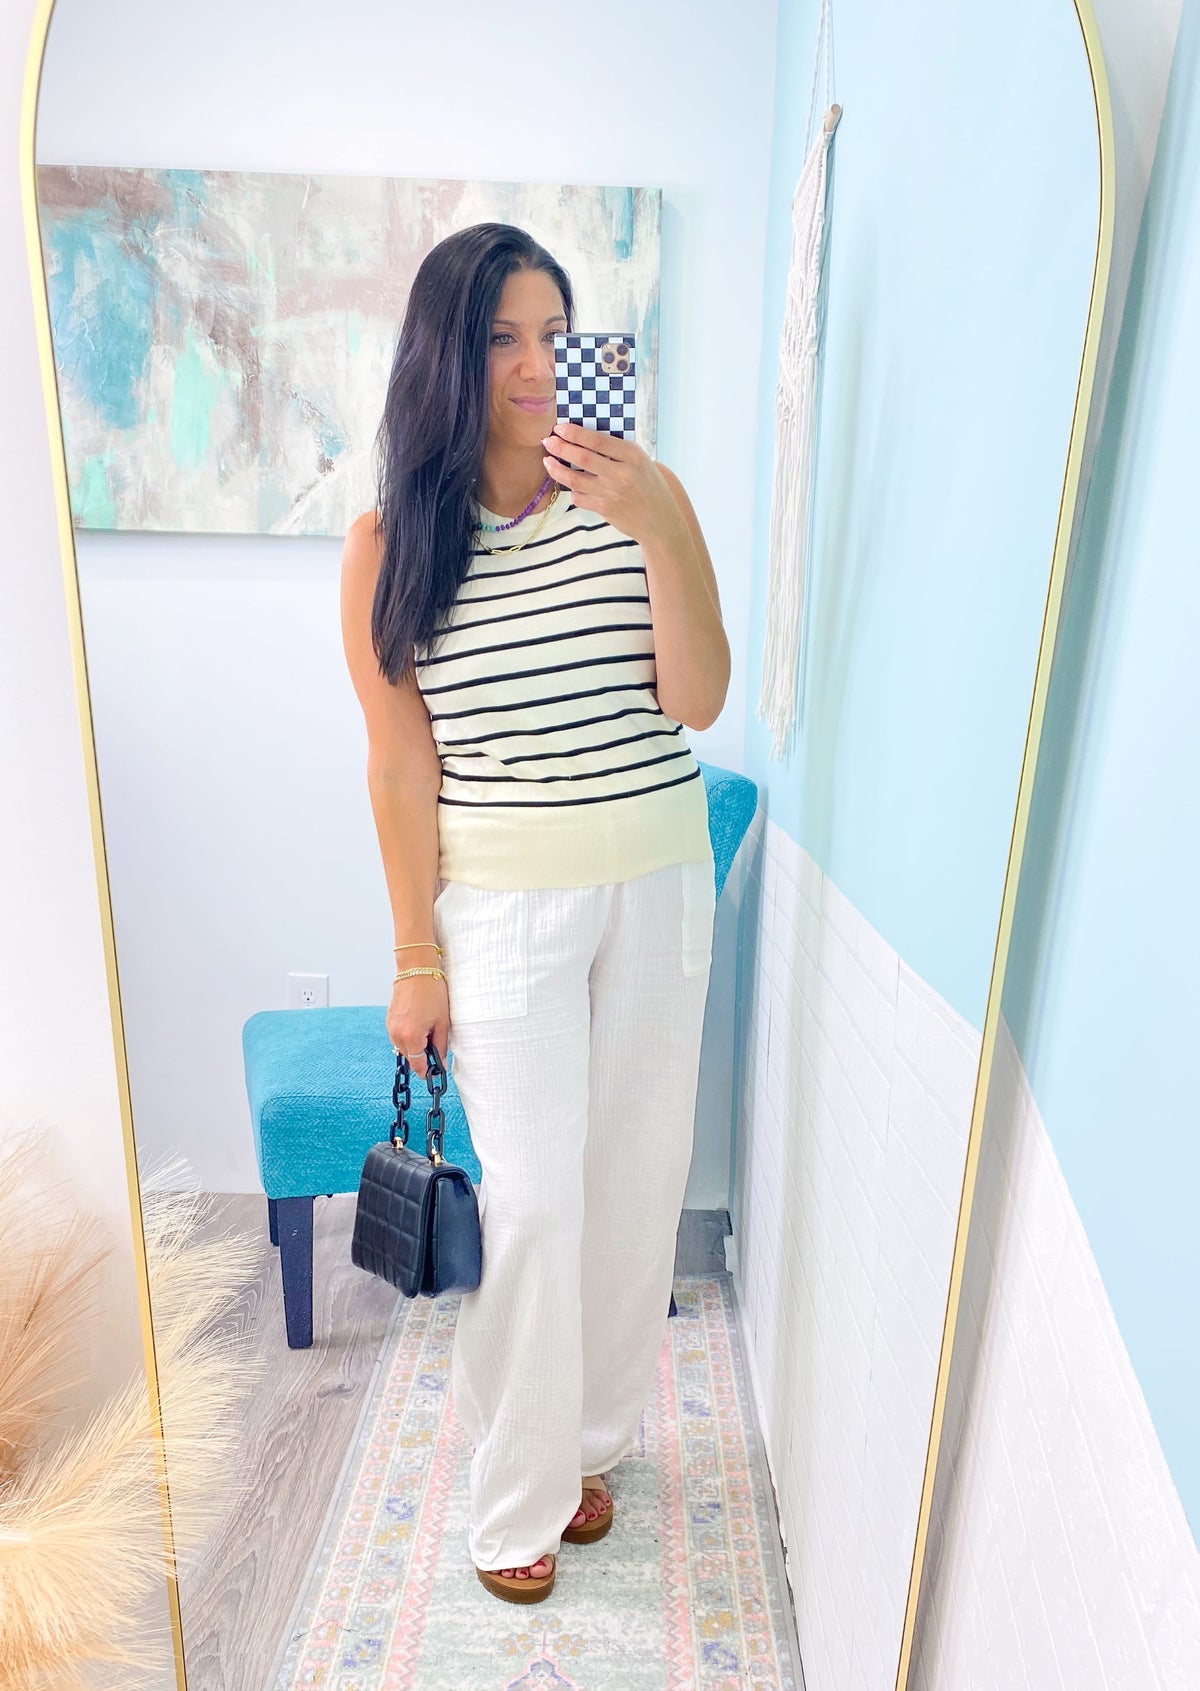 'The Boardwalk' Ivory & Black Stripe Knit Sleeveless Top-This striped knit tank is the definition of effortlessly chic! The soft and luxurious knit fabric is perfect to dress up or wear casual. A great layering top for work &amp; Summer time staple!-Cali Moon Boutique, Plainville Connecticut